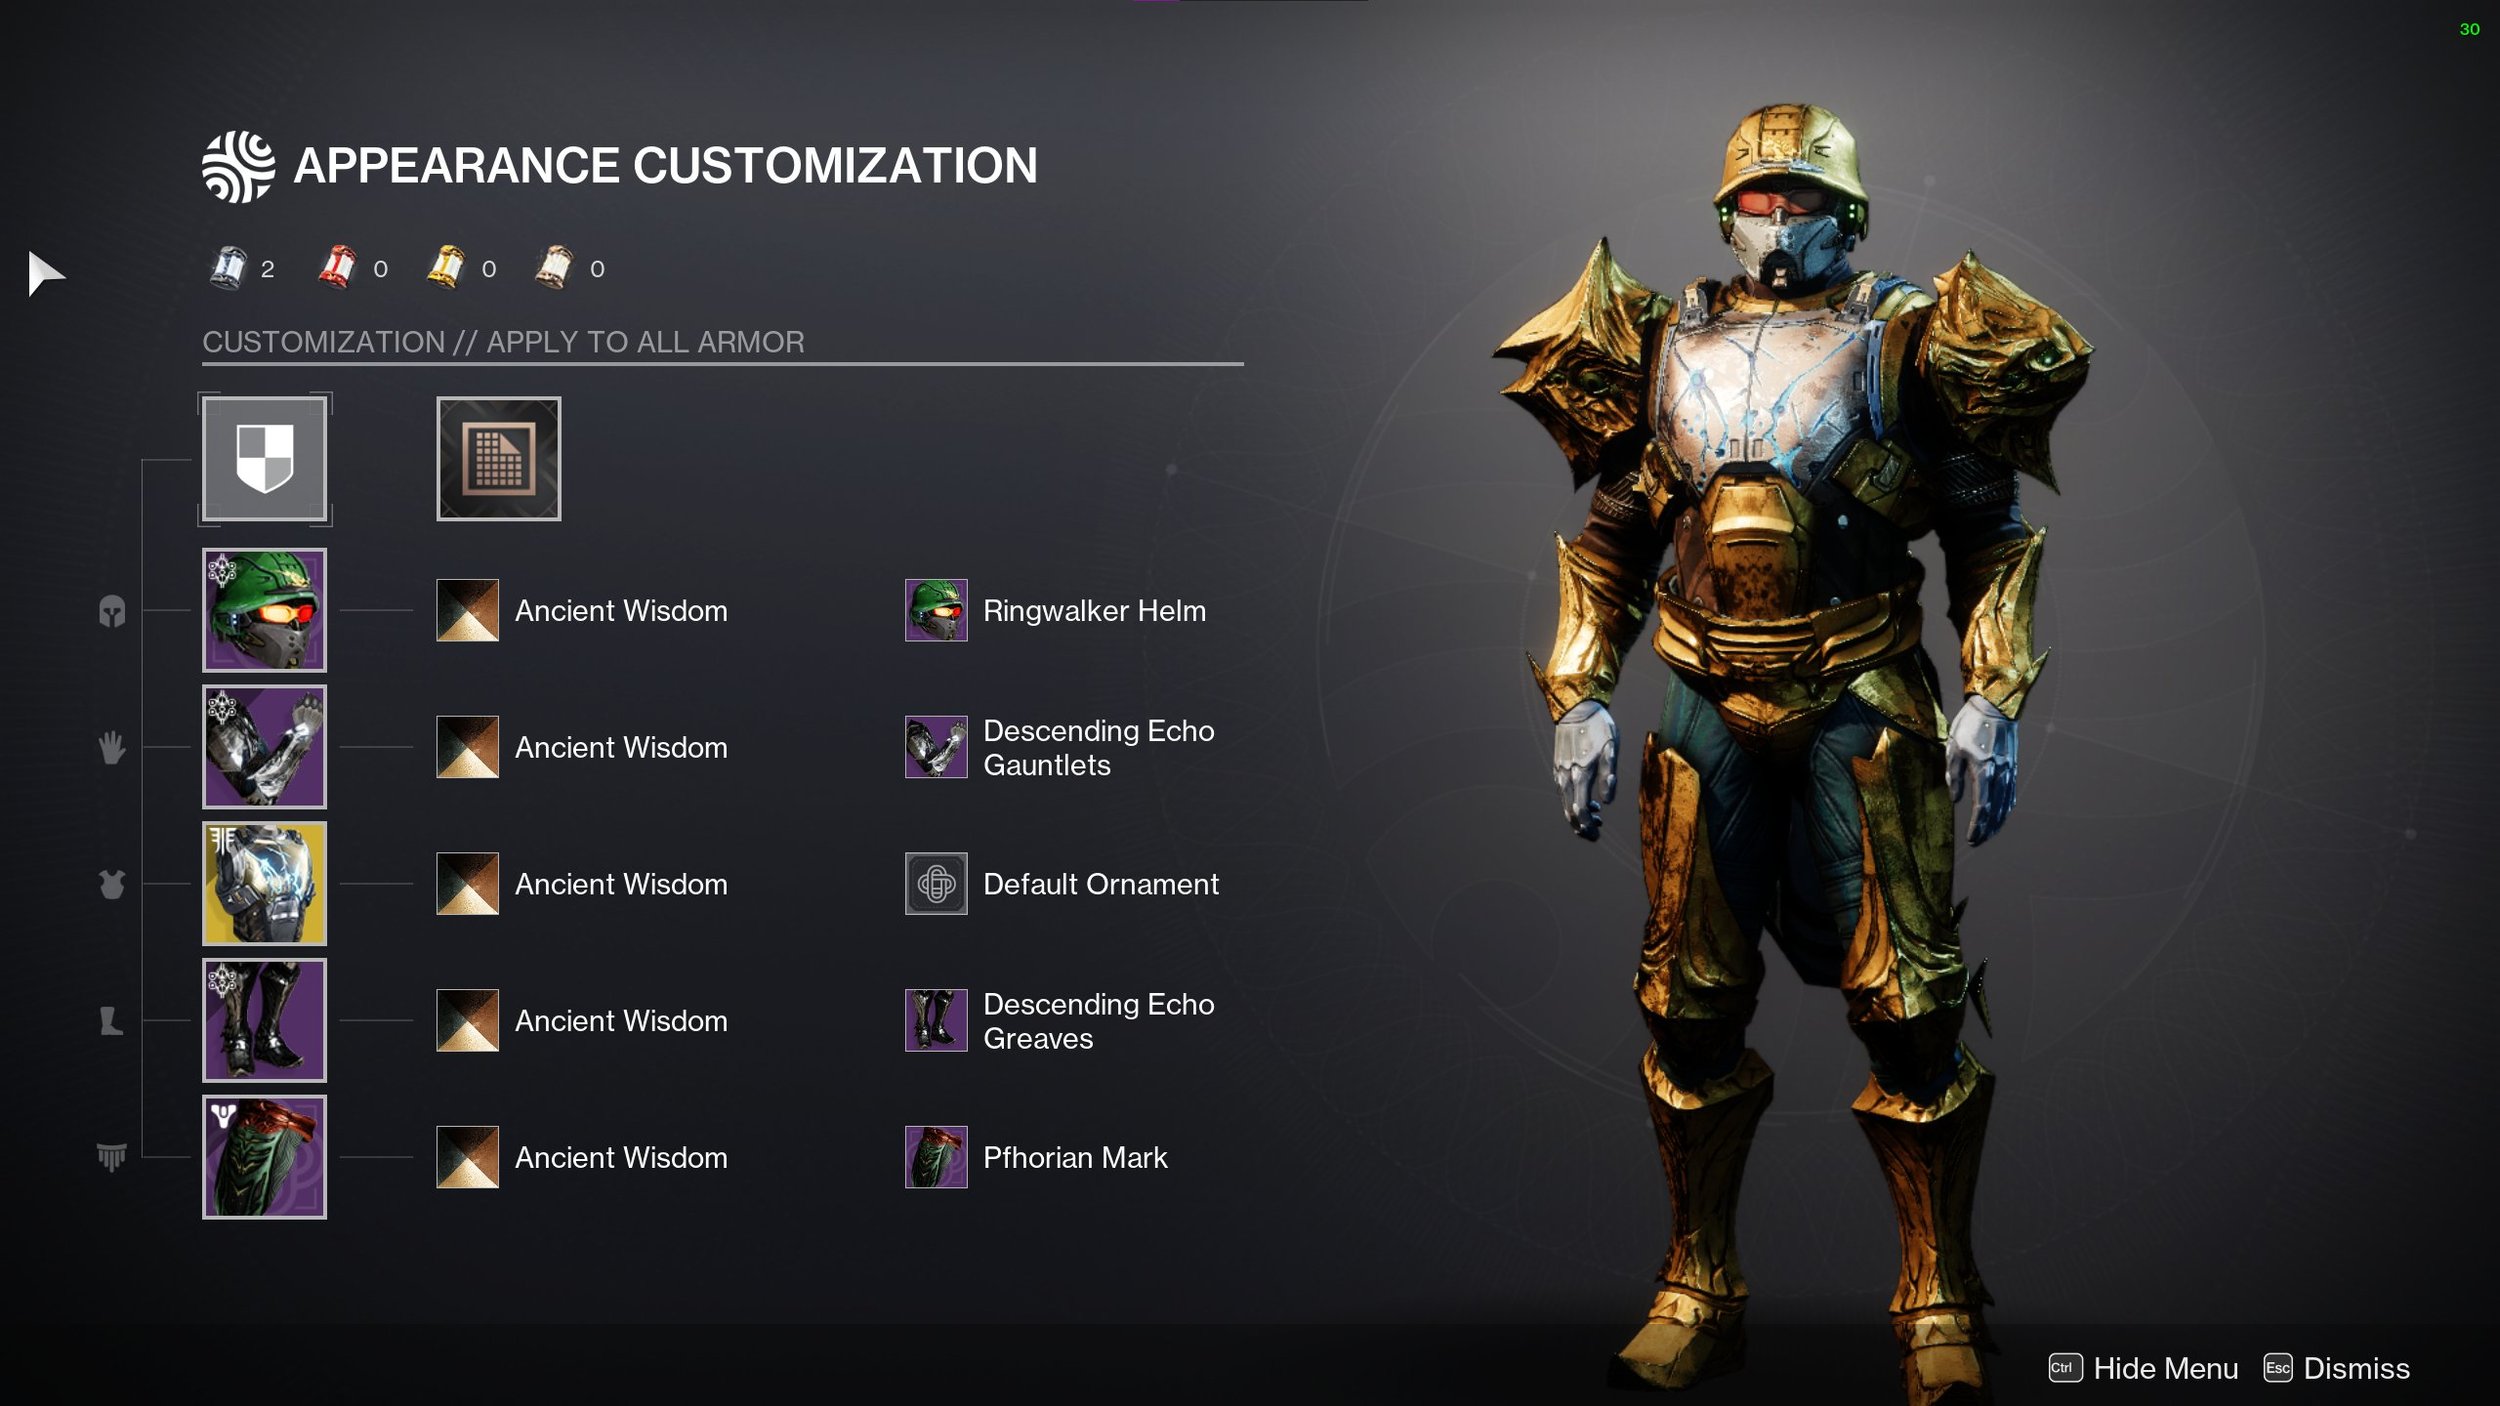 Twitter user Kelarax shows his titan's golden colors and what he used for others to take inspiration